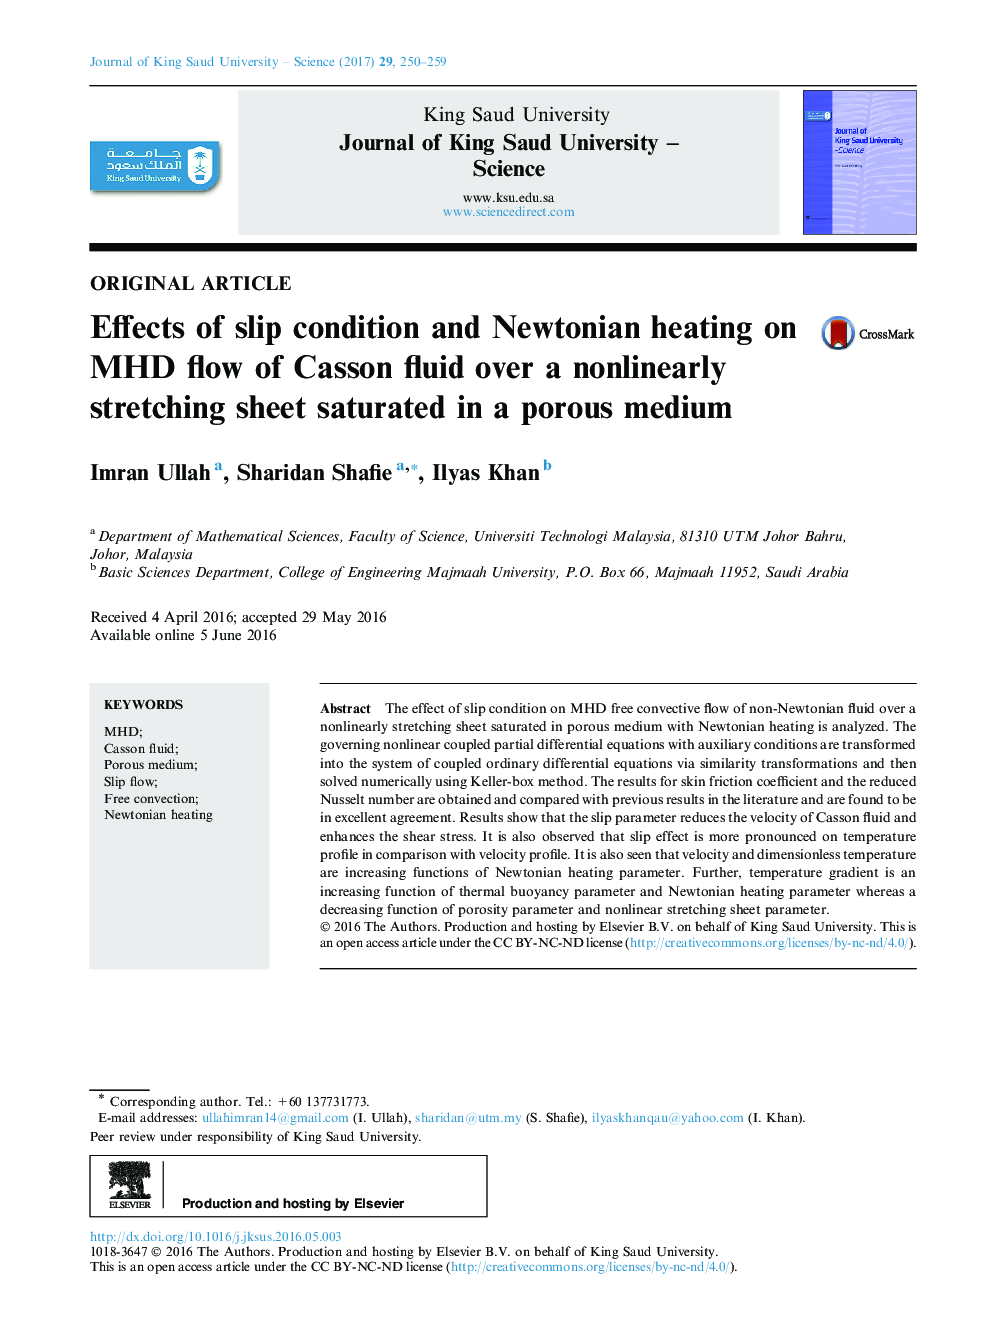 Original articleEffects of slip condition and Newtonian heating on MHD flow of Casson fluid over a nonlinearly stretching sheet saturated in a porous medium